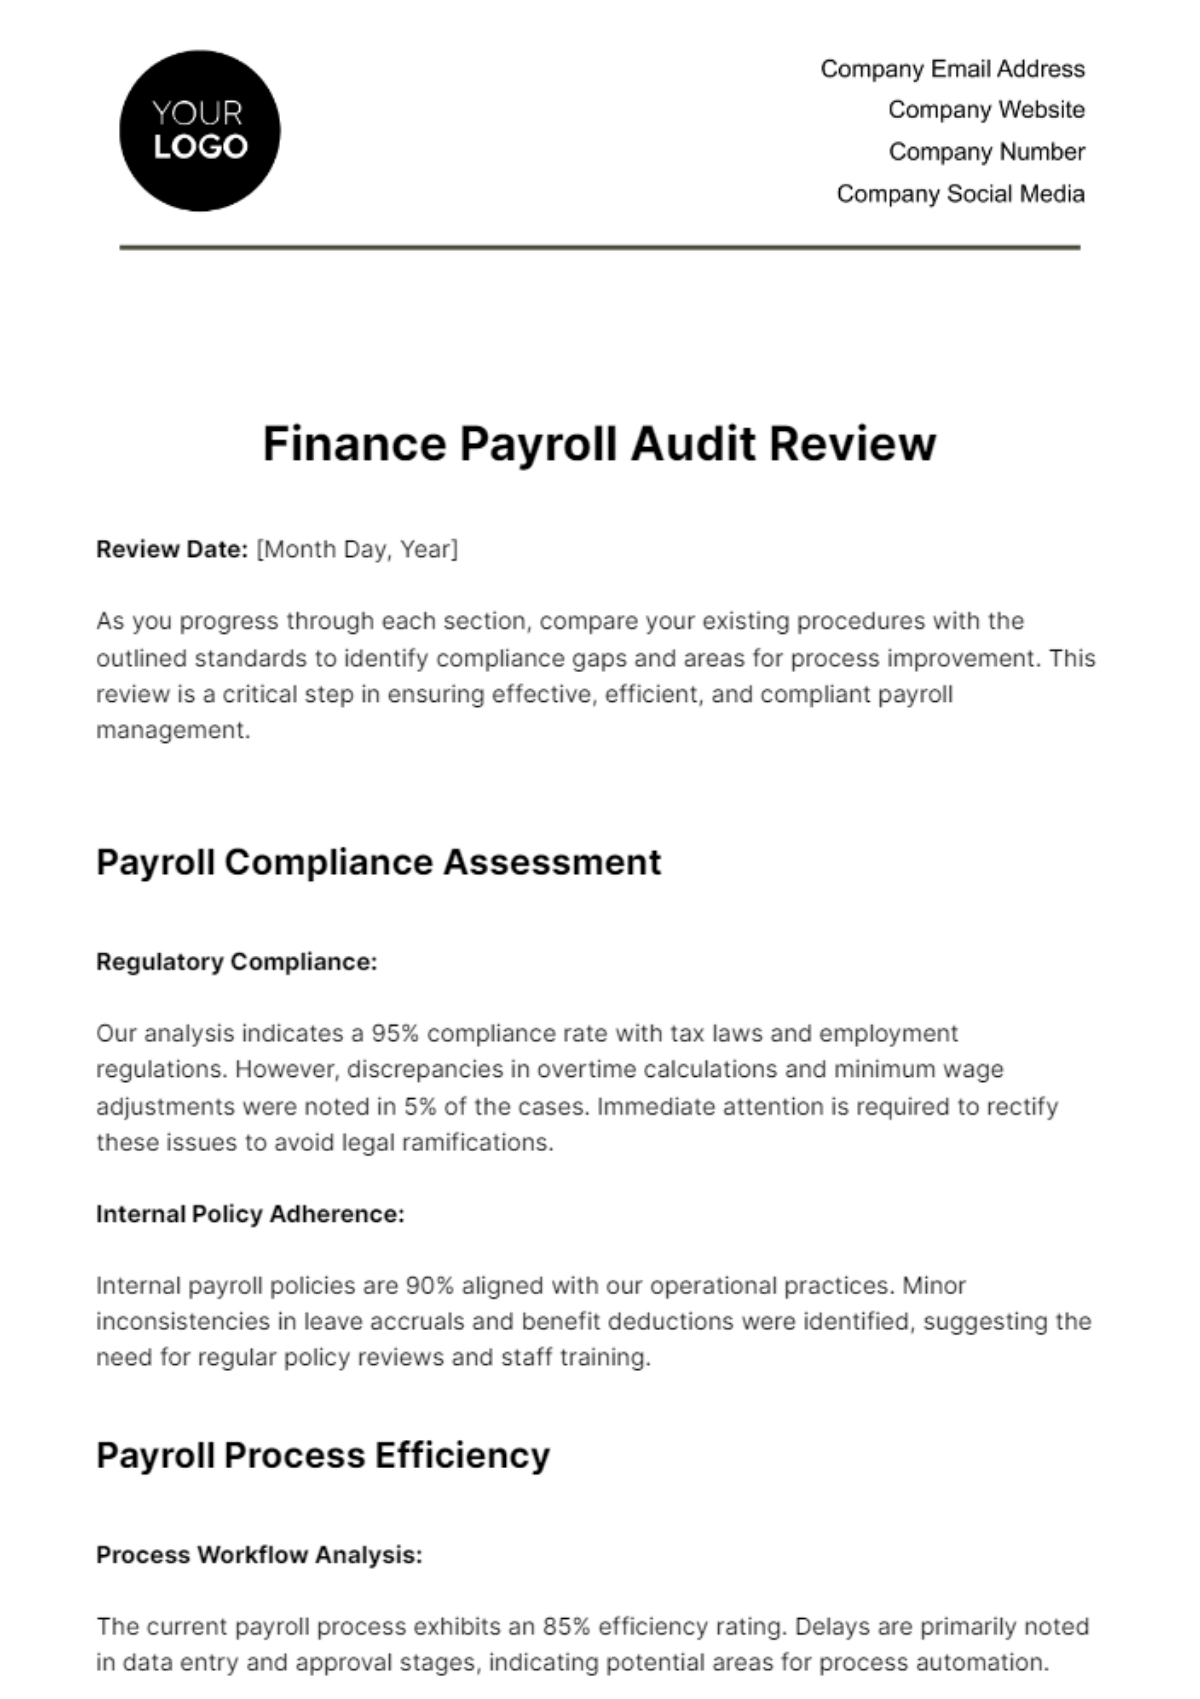 Finance Payroll Audit Review Template